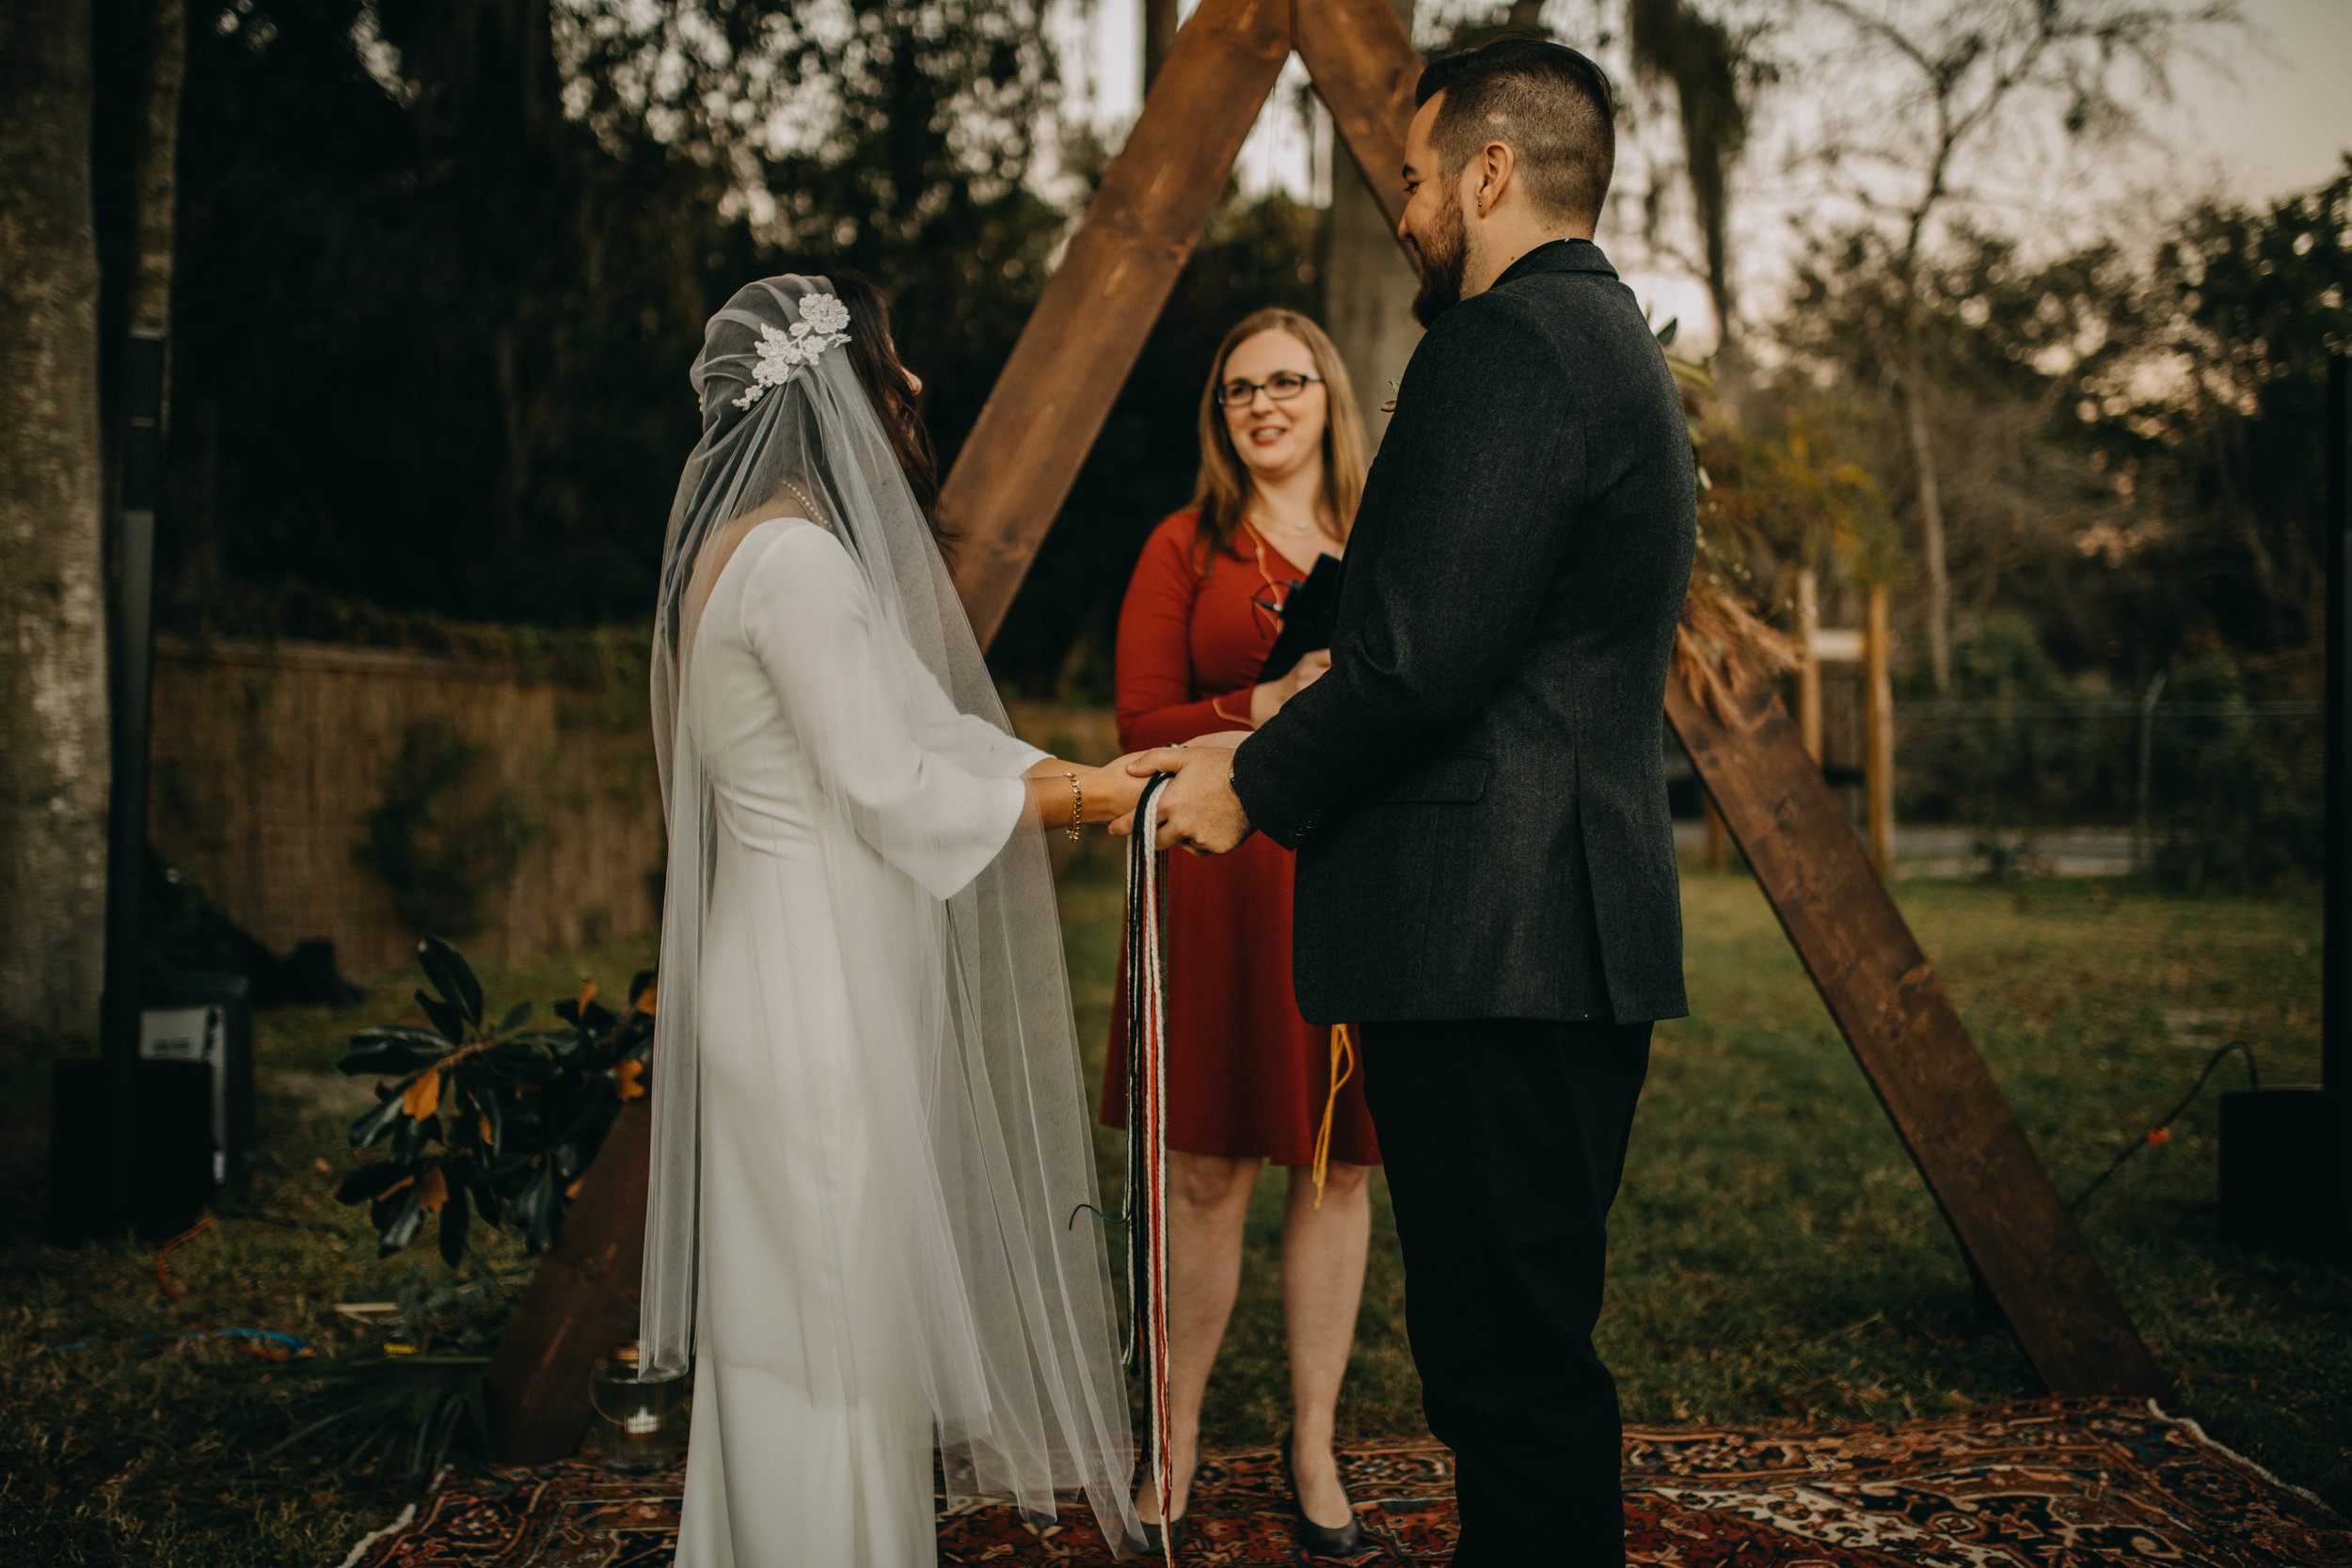 Sunset Outdoor Ceremony | American Traditional Tattoo Themed Eco Friendly Dark Florida Wedding